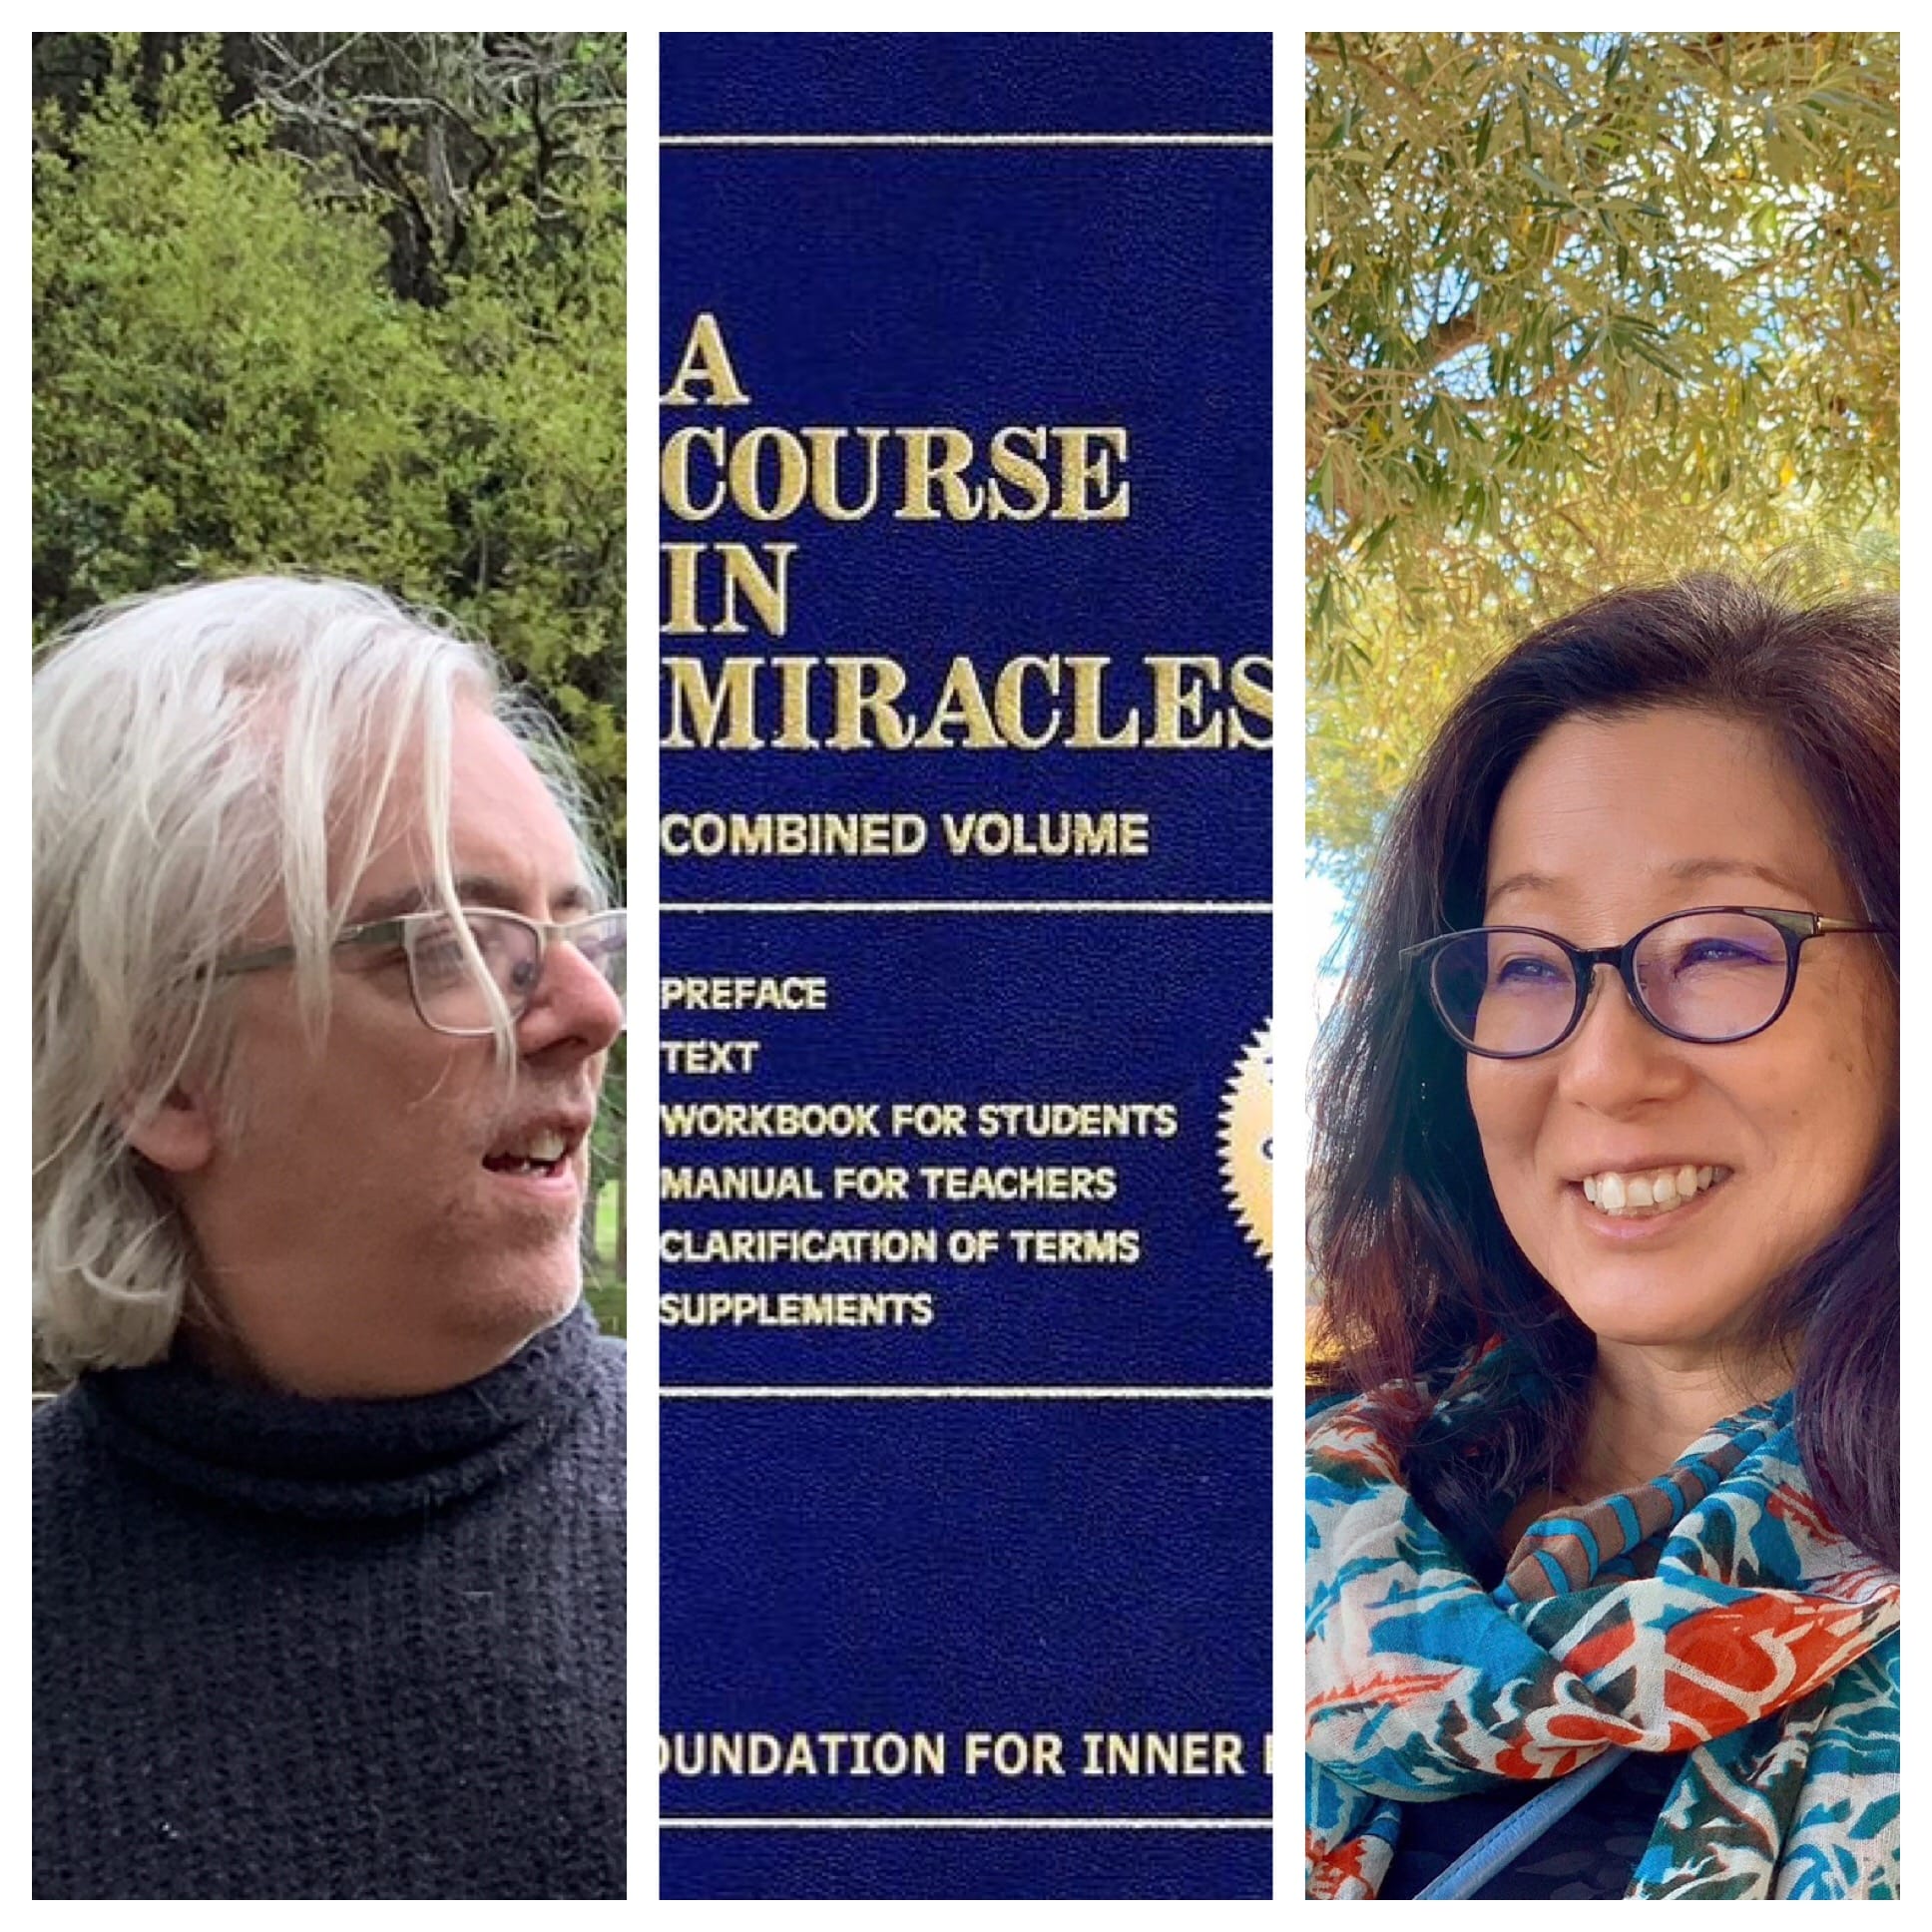 A Course in Miracles classes